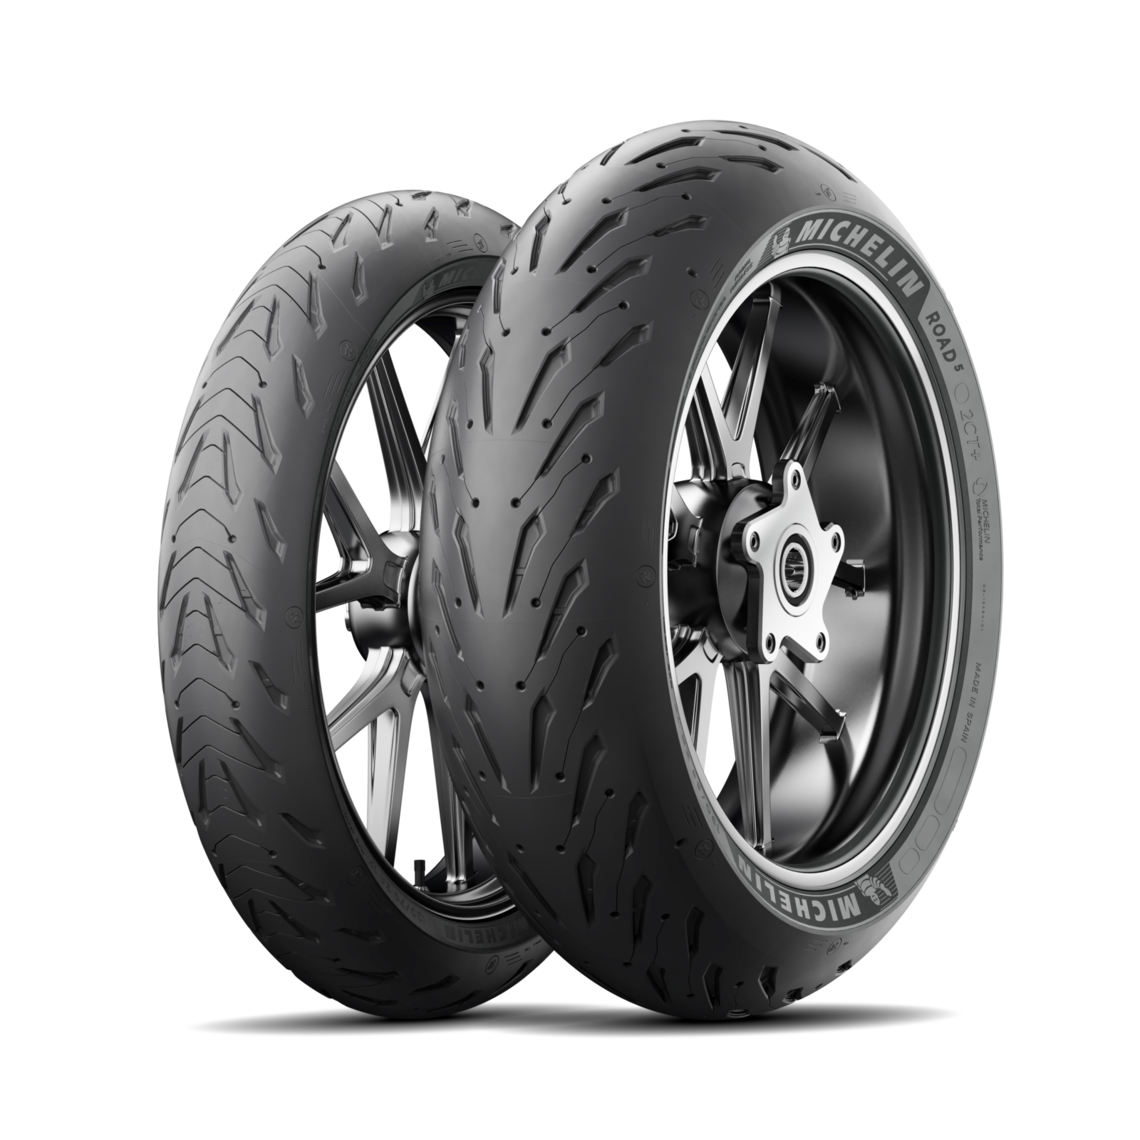 MICHELIN ROAD 5 - Motorbike Tyre | MICHELIN India Official Website